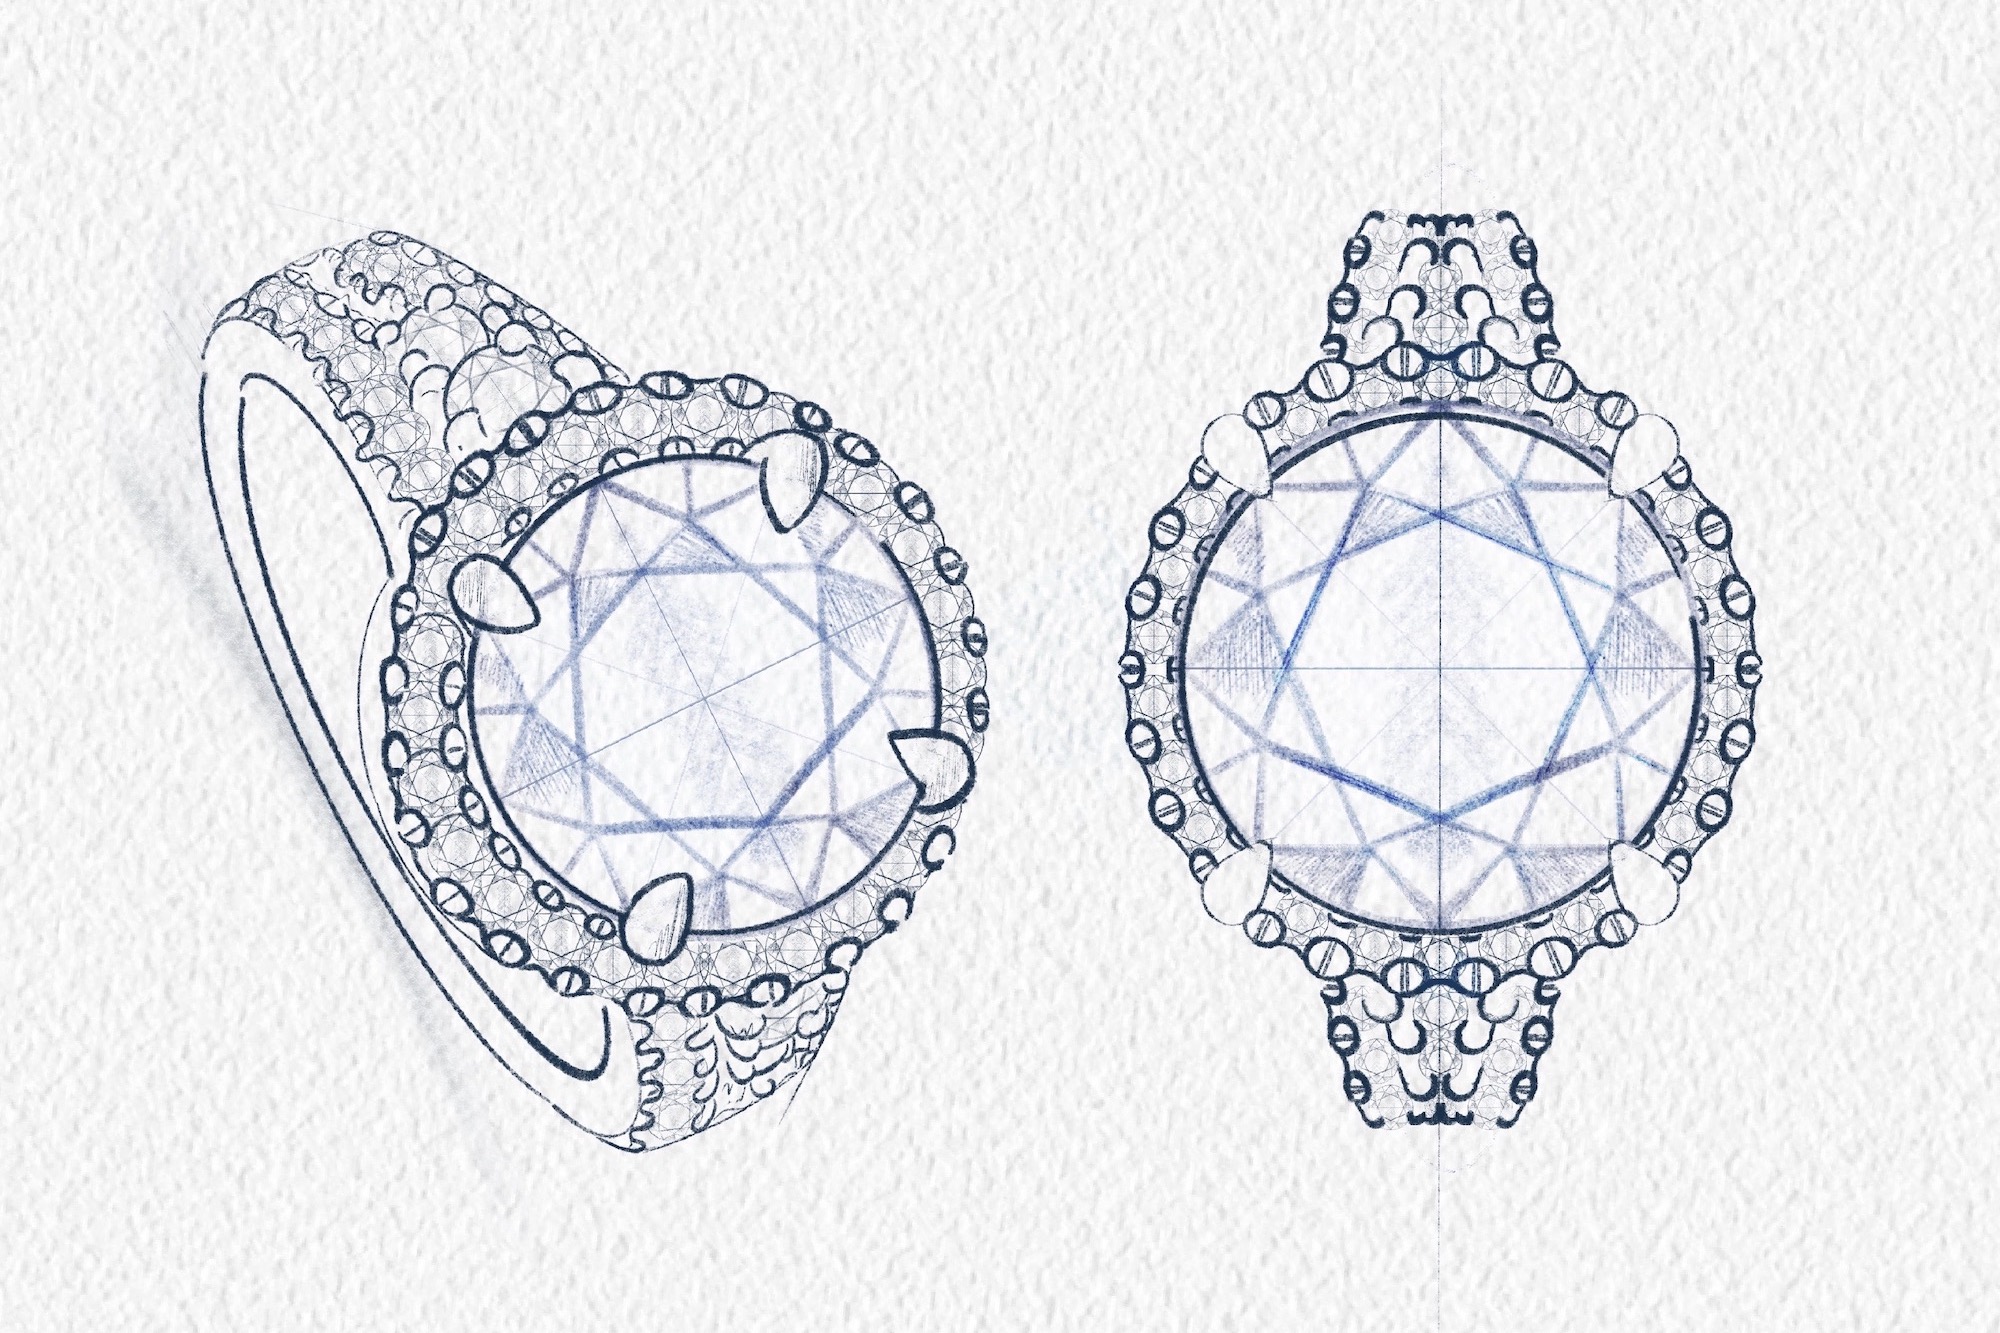 Pencil Drawing Ring Diamond Isolated Sketch Stock Illustration 1063072070   Shutterstock